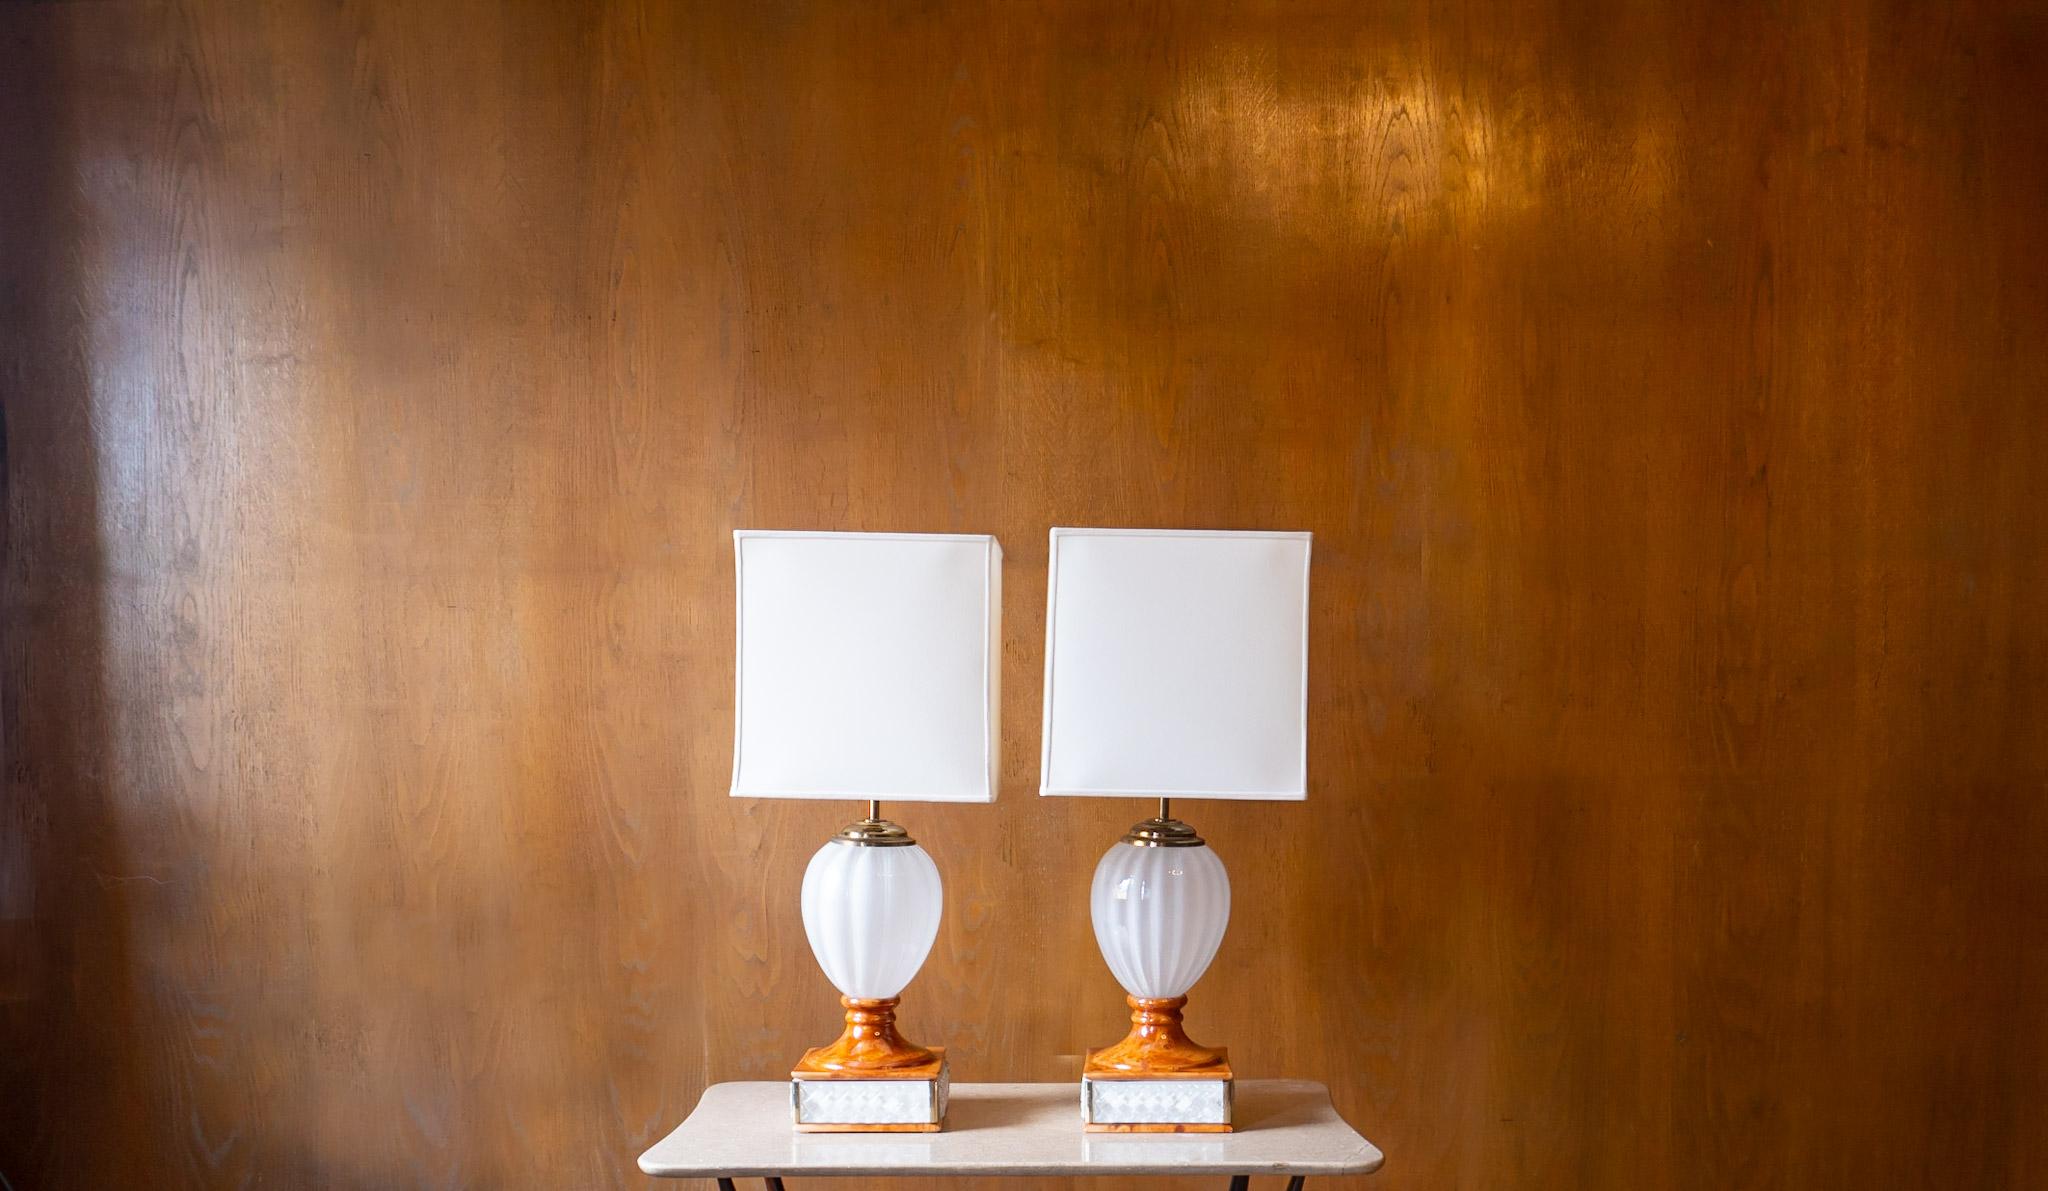 Hollywood Regency Tommaso Barbi table lamp, Ceramic, Murano glass, Italy 70s.

A rare set of 2 impressive table lamps by Tommaso Barbi handmade of shiny brown ceramice and white Murano milky glass. The square base of the lamp captivates with